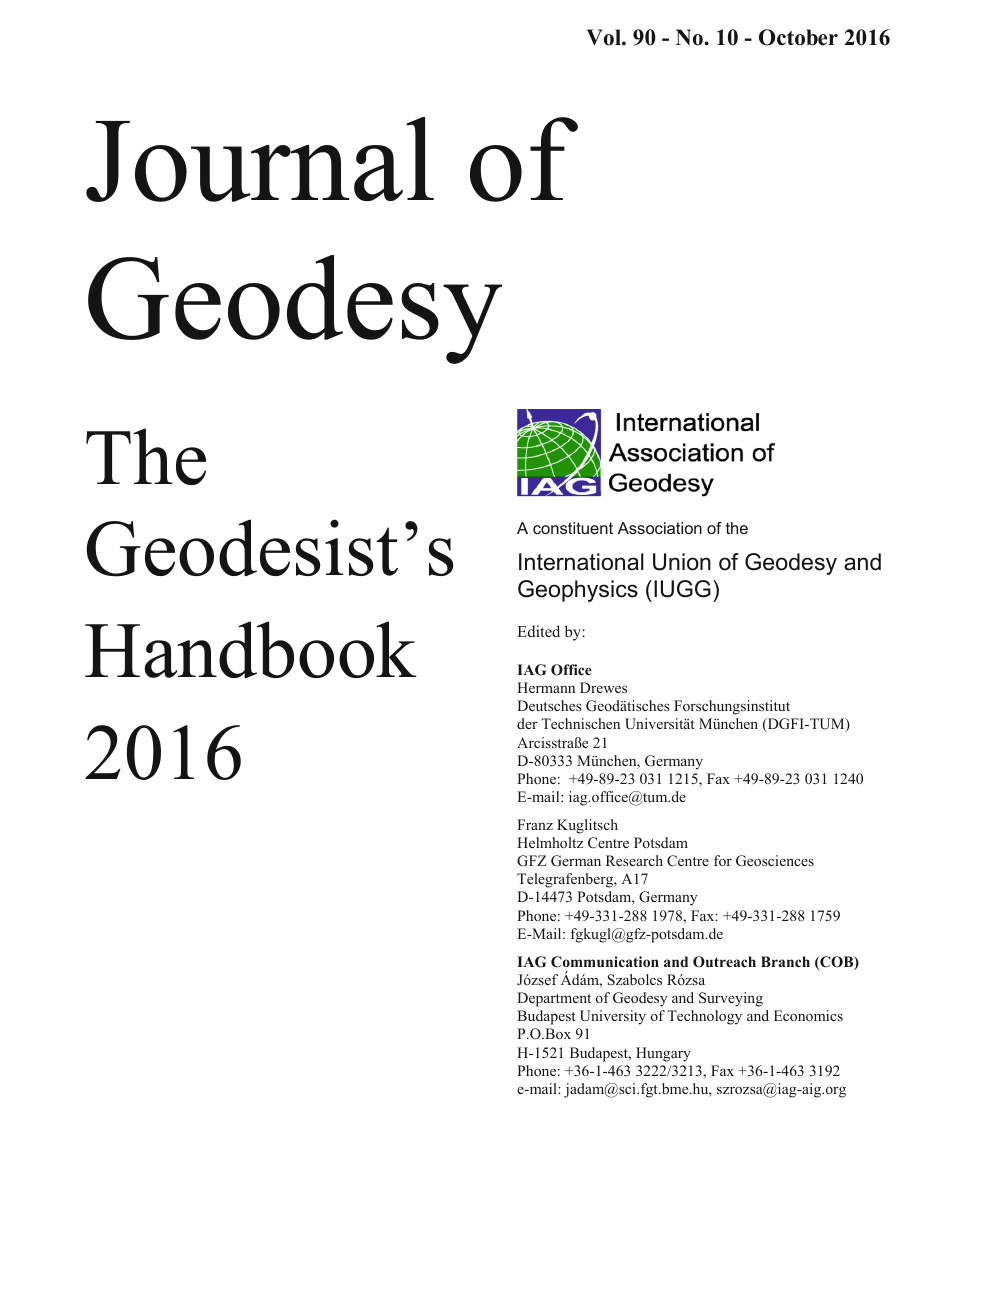 The Geodesist's Handbook 2016 – topic of research paper in Earth 